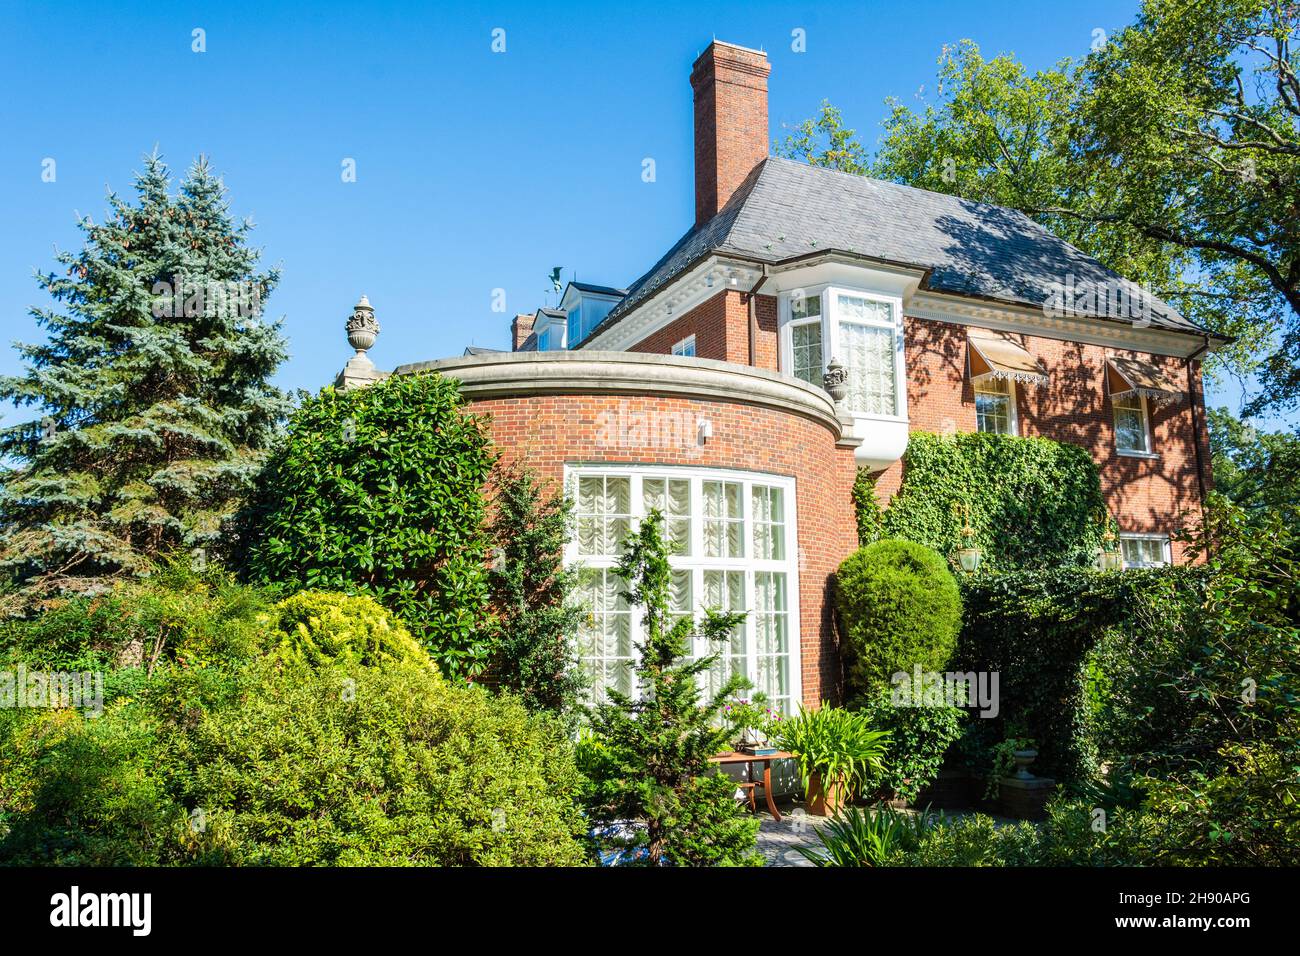 Washington D.C., United States of America – September 23, 2016. Hillwood Estate Mansion, currently housing the Hillwood Museum, in Washington D.C. Stock Photo